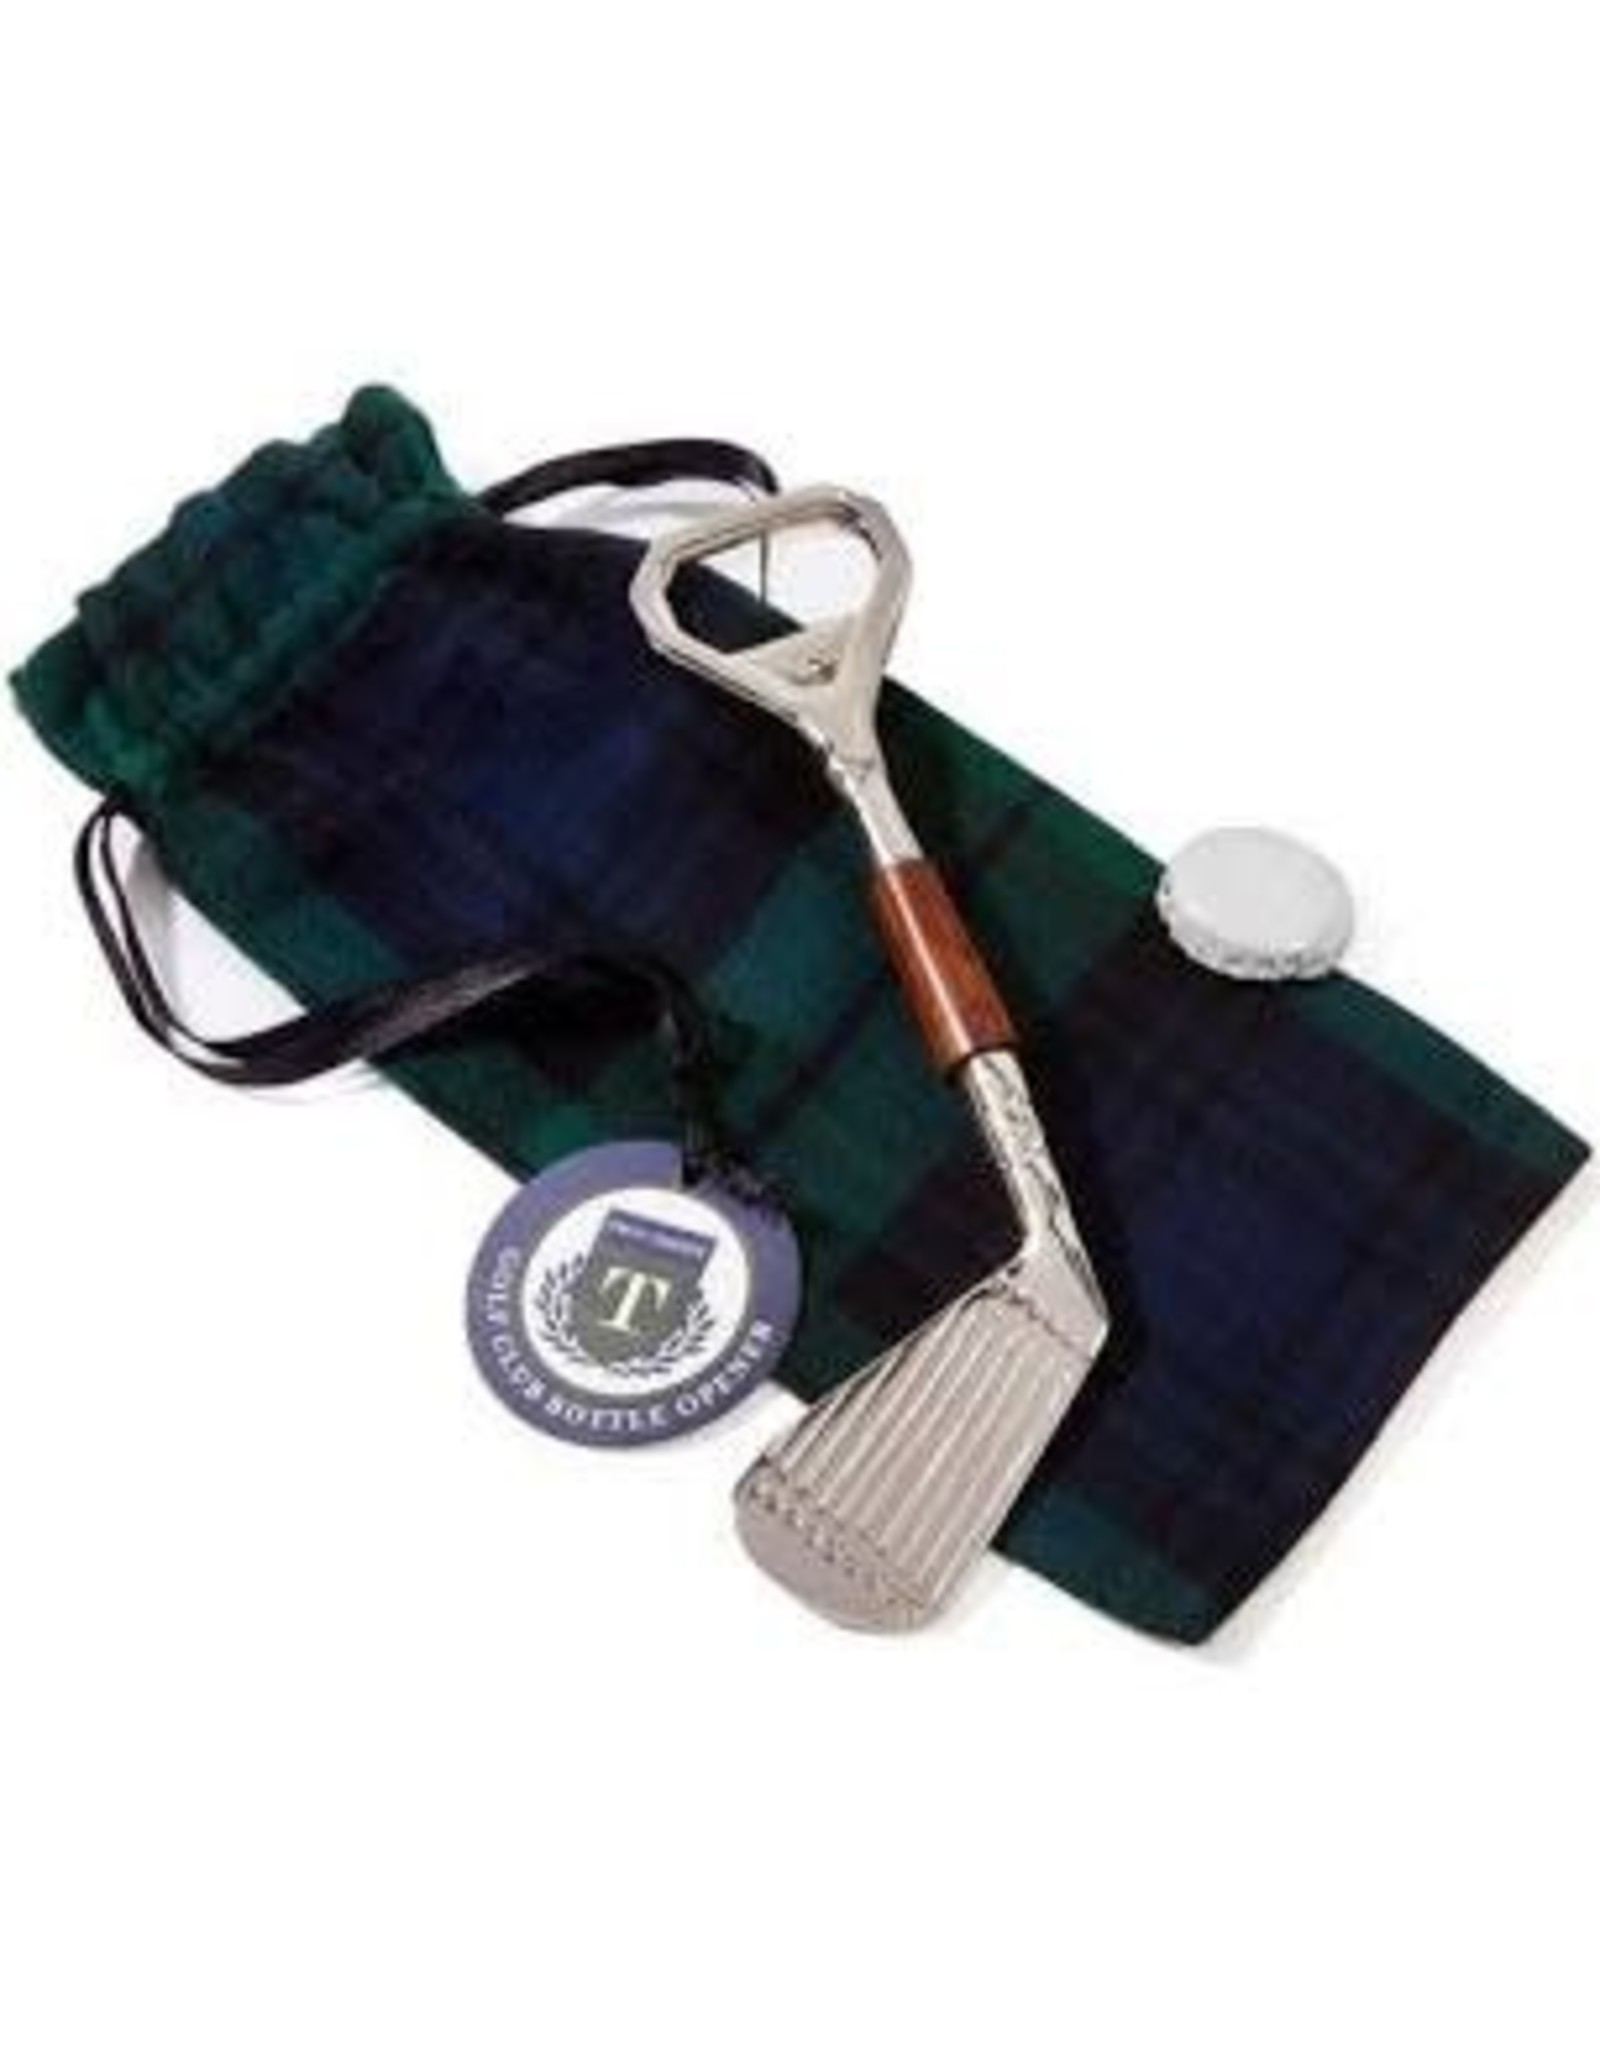 Two's Company Inc. Golf Club Bottle Opener in Plaid Gift Pouch - Brass/Mango Wood